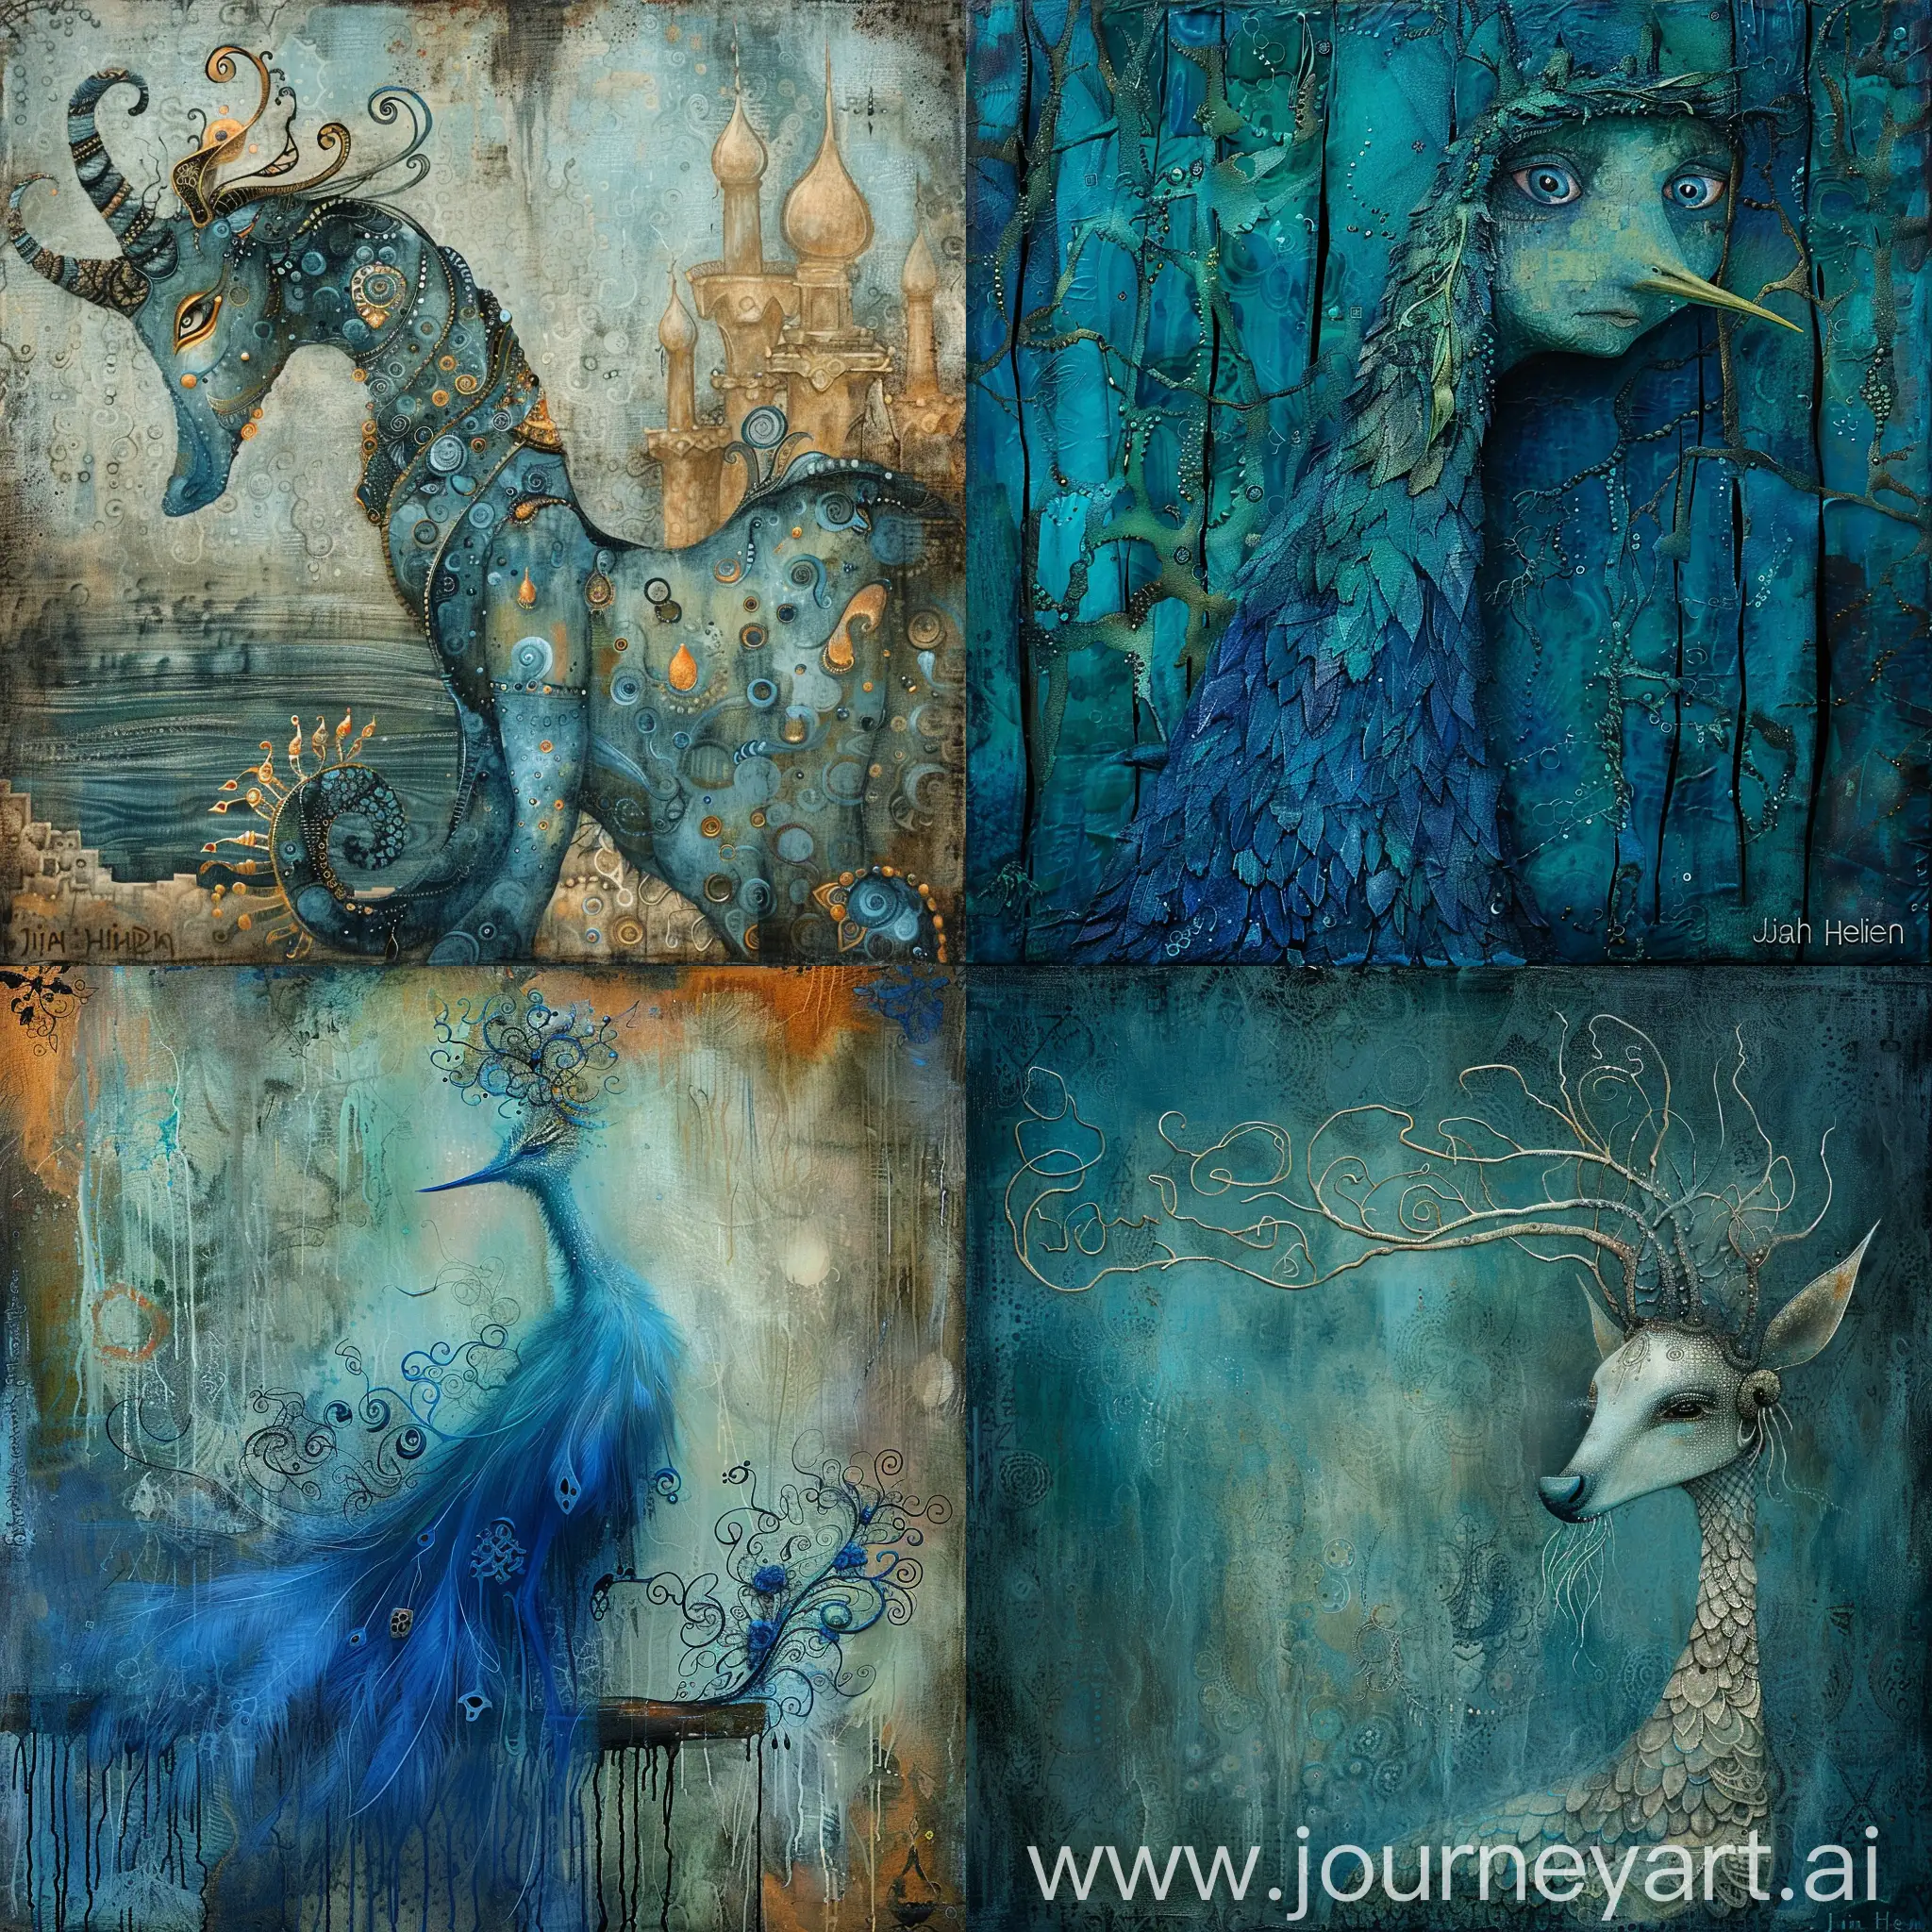 whimsical FANTASY creature, in the style of enchanting surrealism, with hidden meanings, illusory images, jamie heiden, dark azure and aquamarine, texture-rich canvases, whimsical beauty, qajar art, raw art
